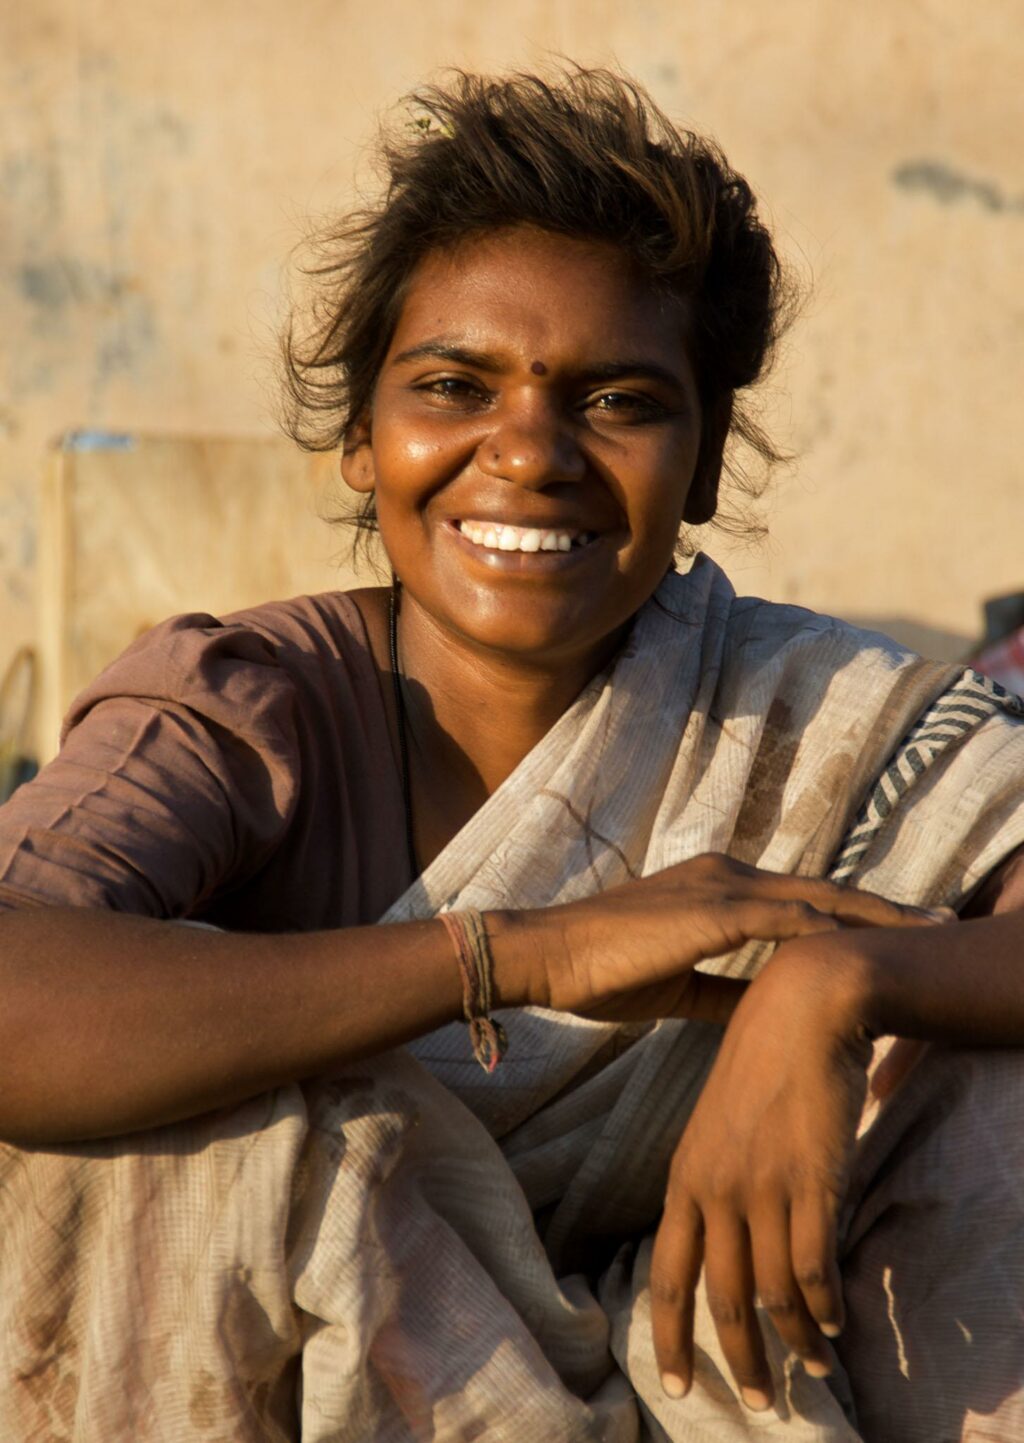 Beautiful Indian woman living on the streets of Chennai